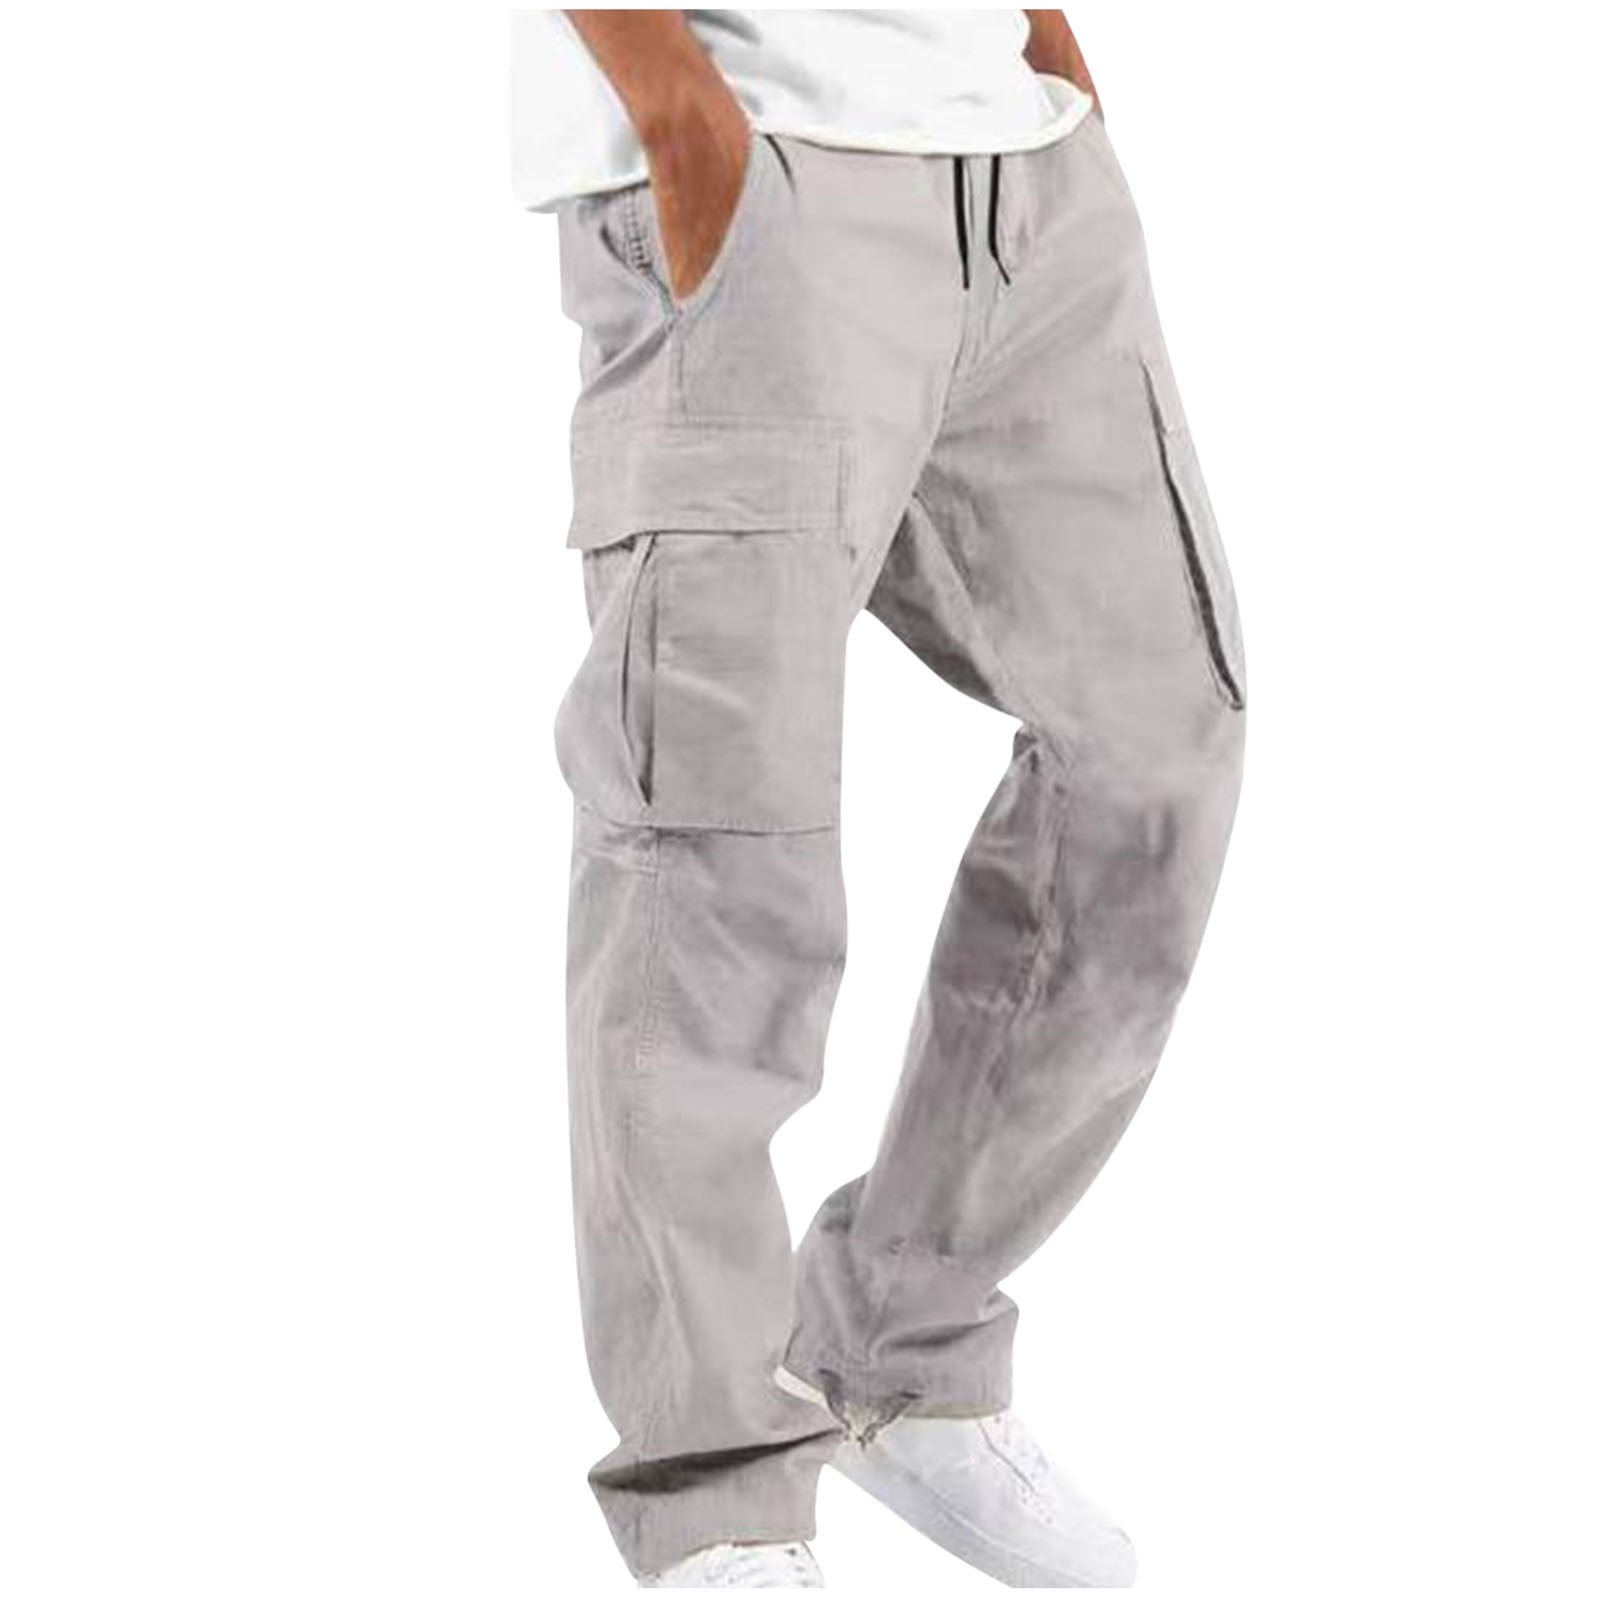 Mens Baggy Cargo Pants Casual Lightweight Hiking Fishing Trousers